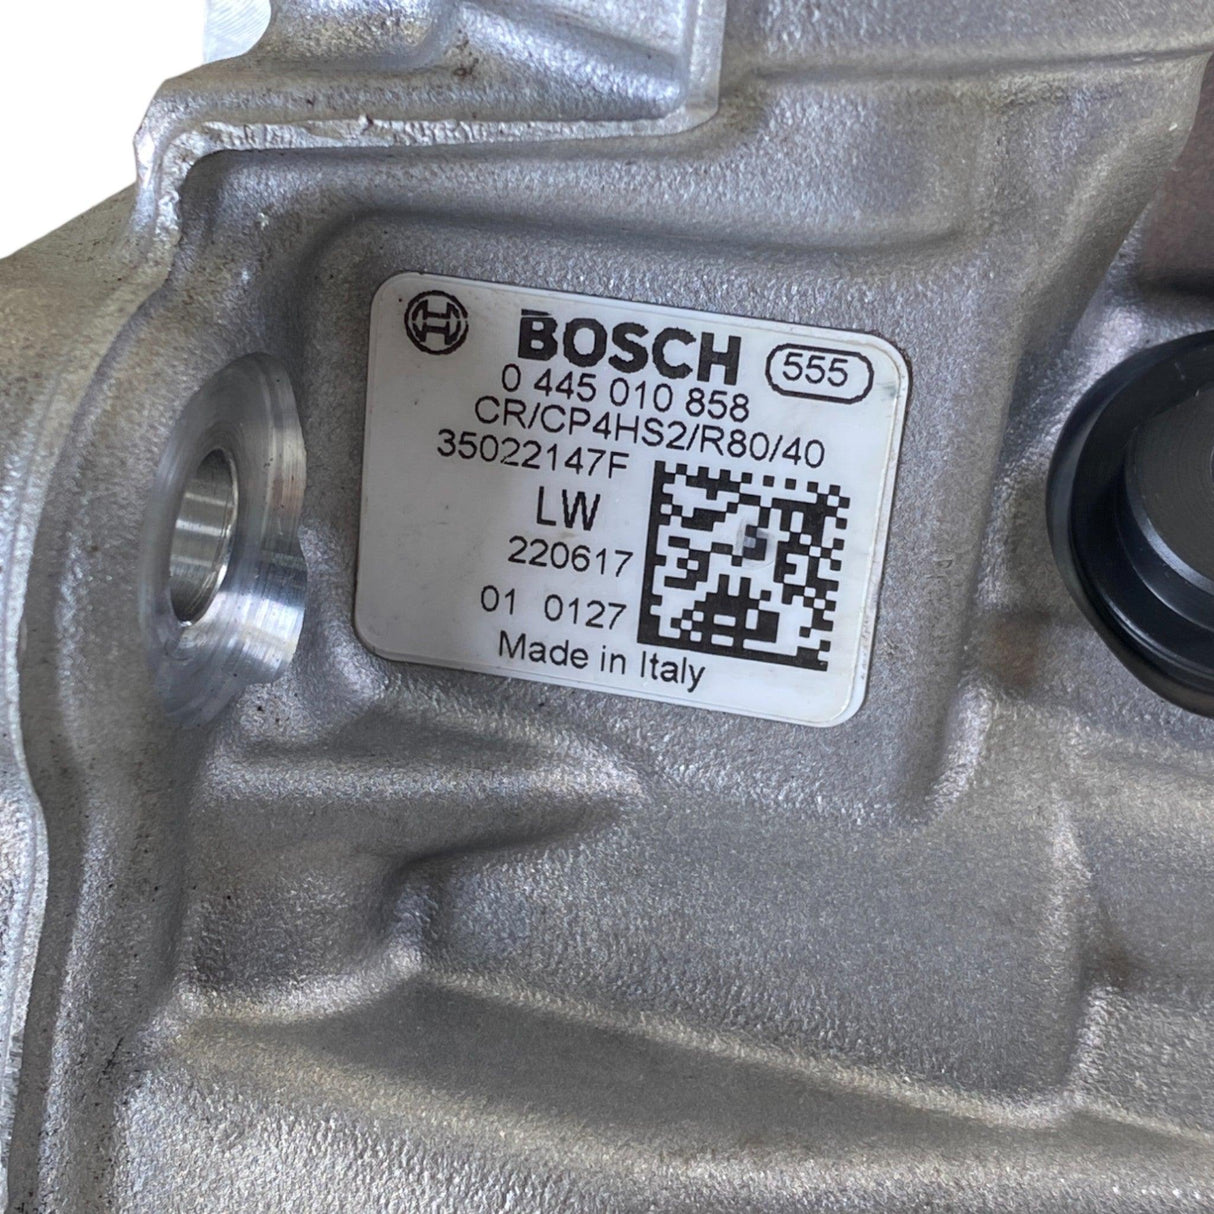 0445010858 Oem Bosch Fuel Injection Pump For Dodge Ram Jeep Cherokee 2014-17 - Truck To Trailer